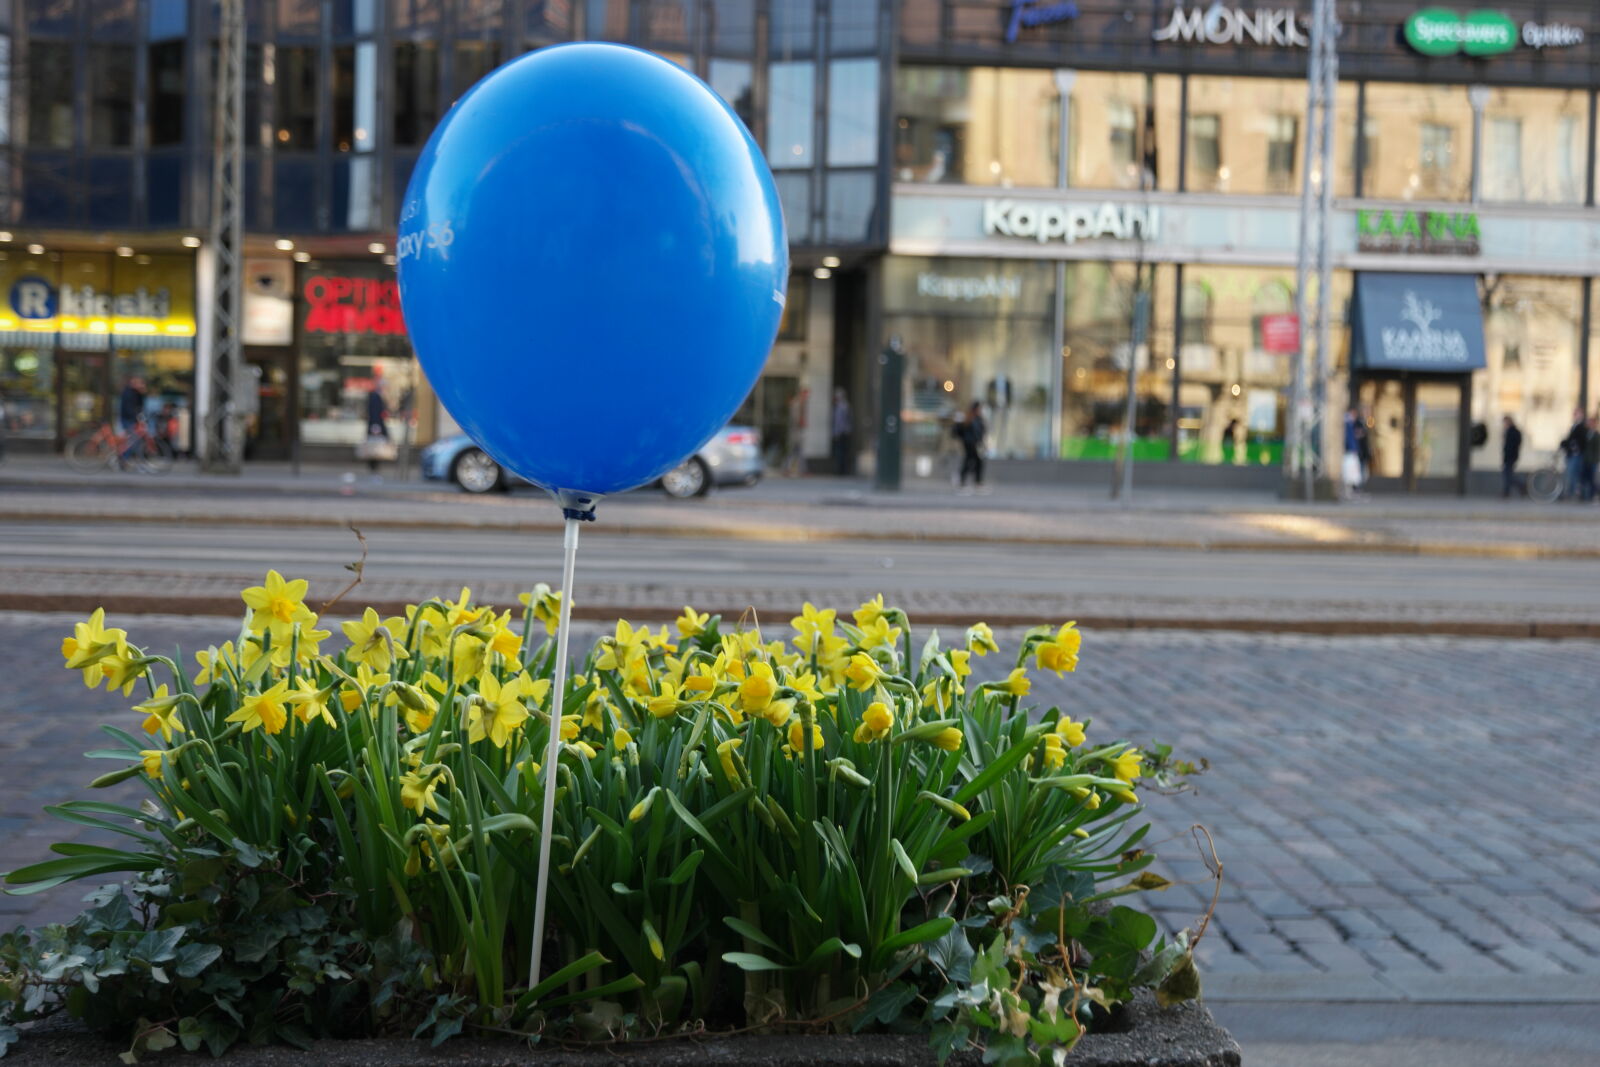 Samsung NX500 sample photo. The balloon commercial photography